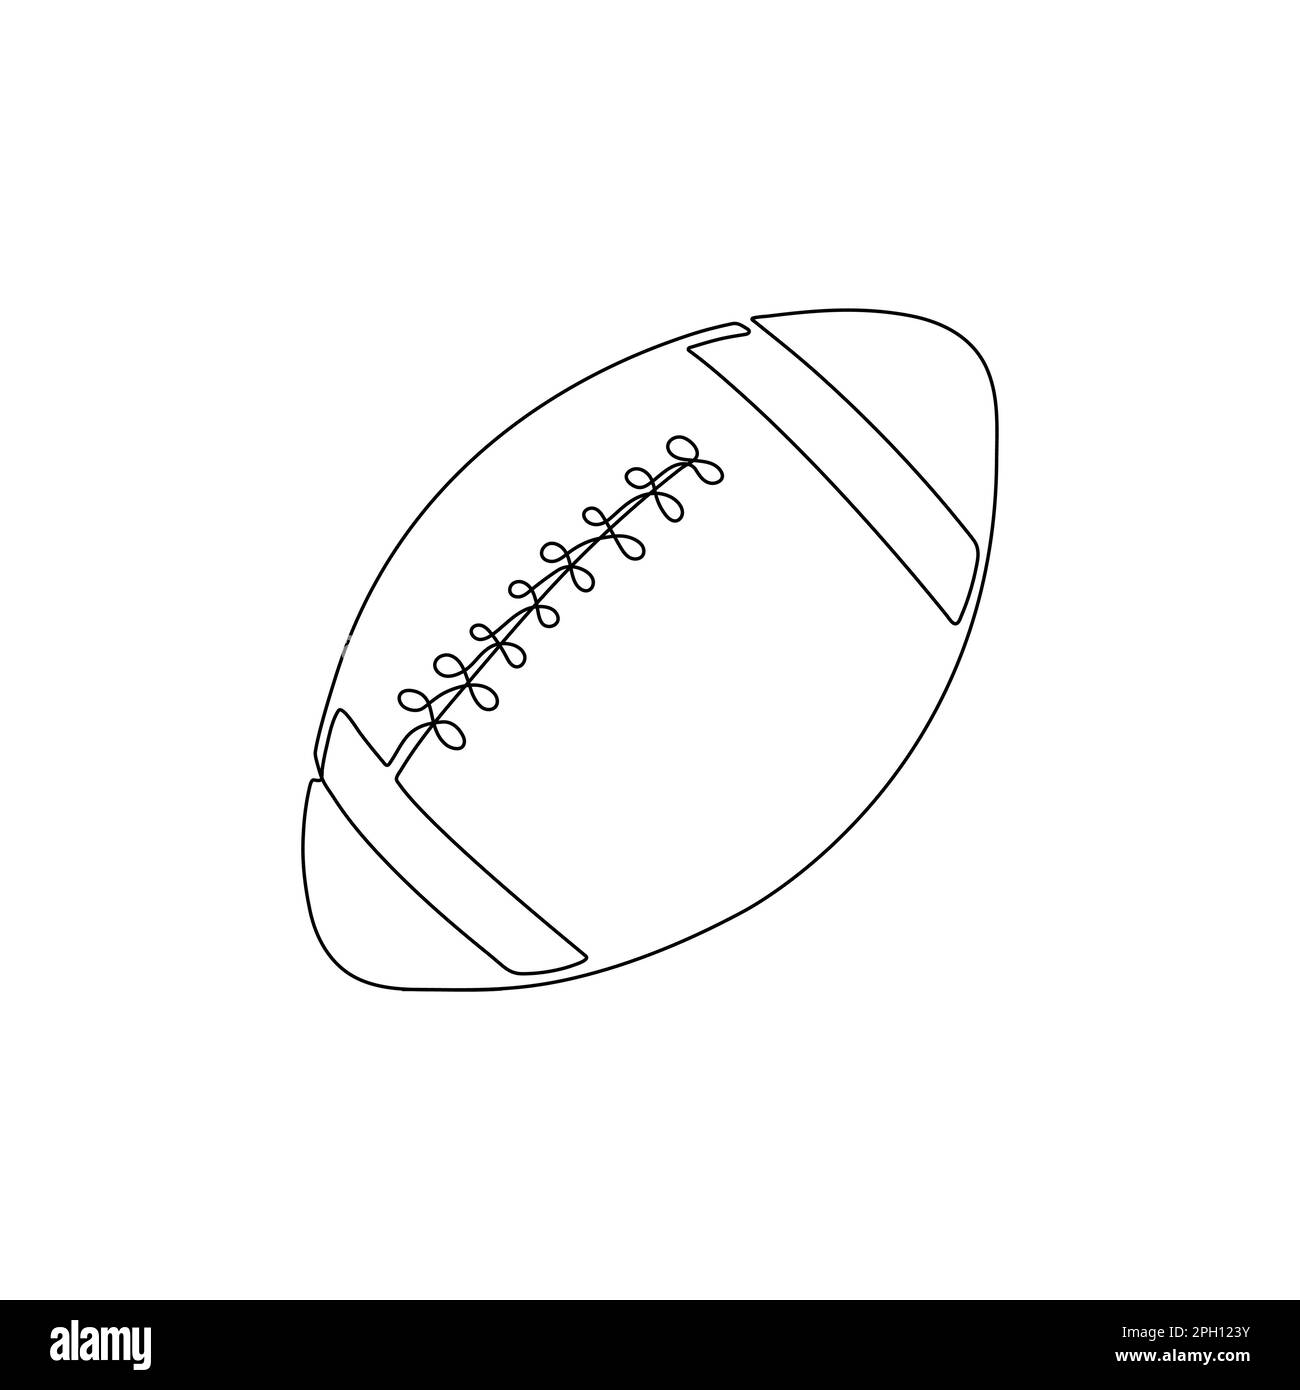 American football One line drawing on white Stock Vector